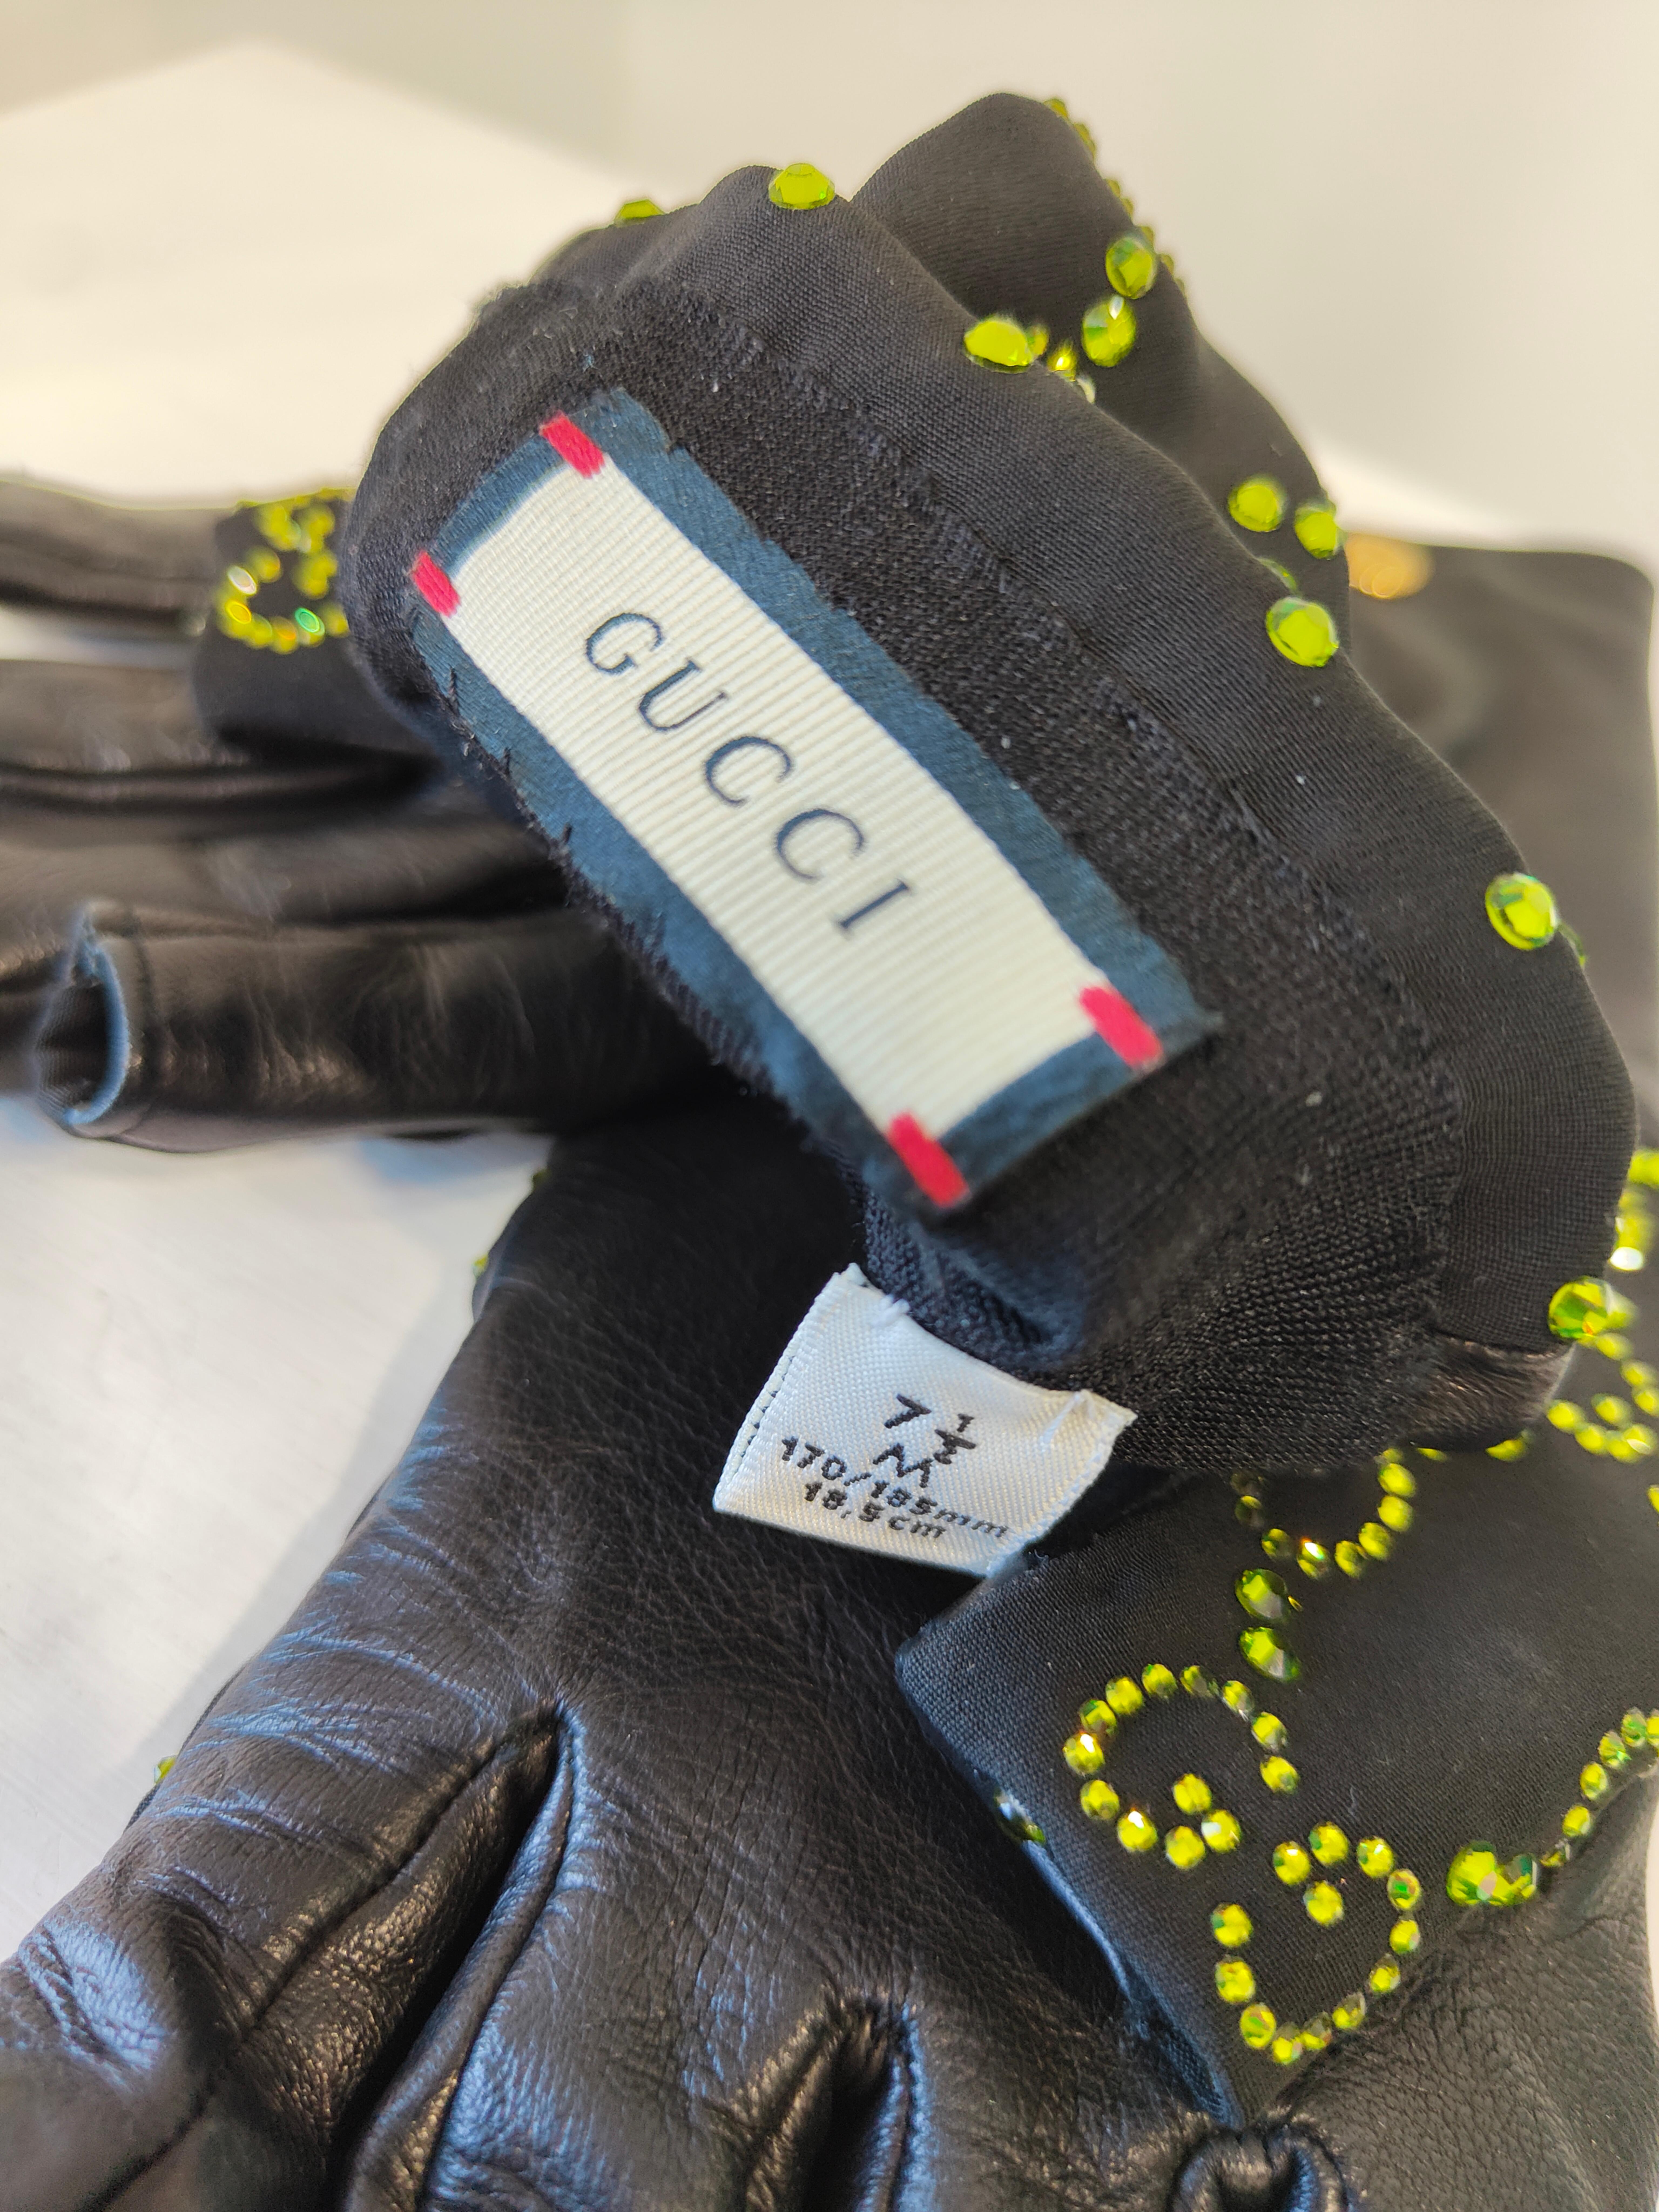 Gucci for Billie Eilish limited edition black leather green Swarovski gloves
Totally made in Italy in size 7/